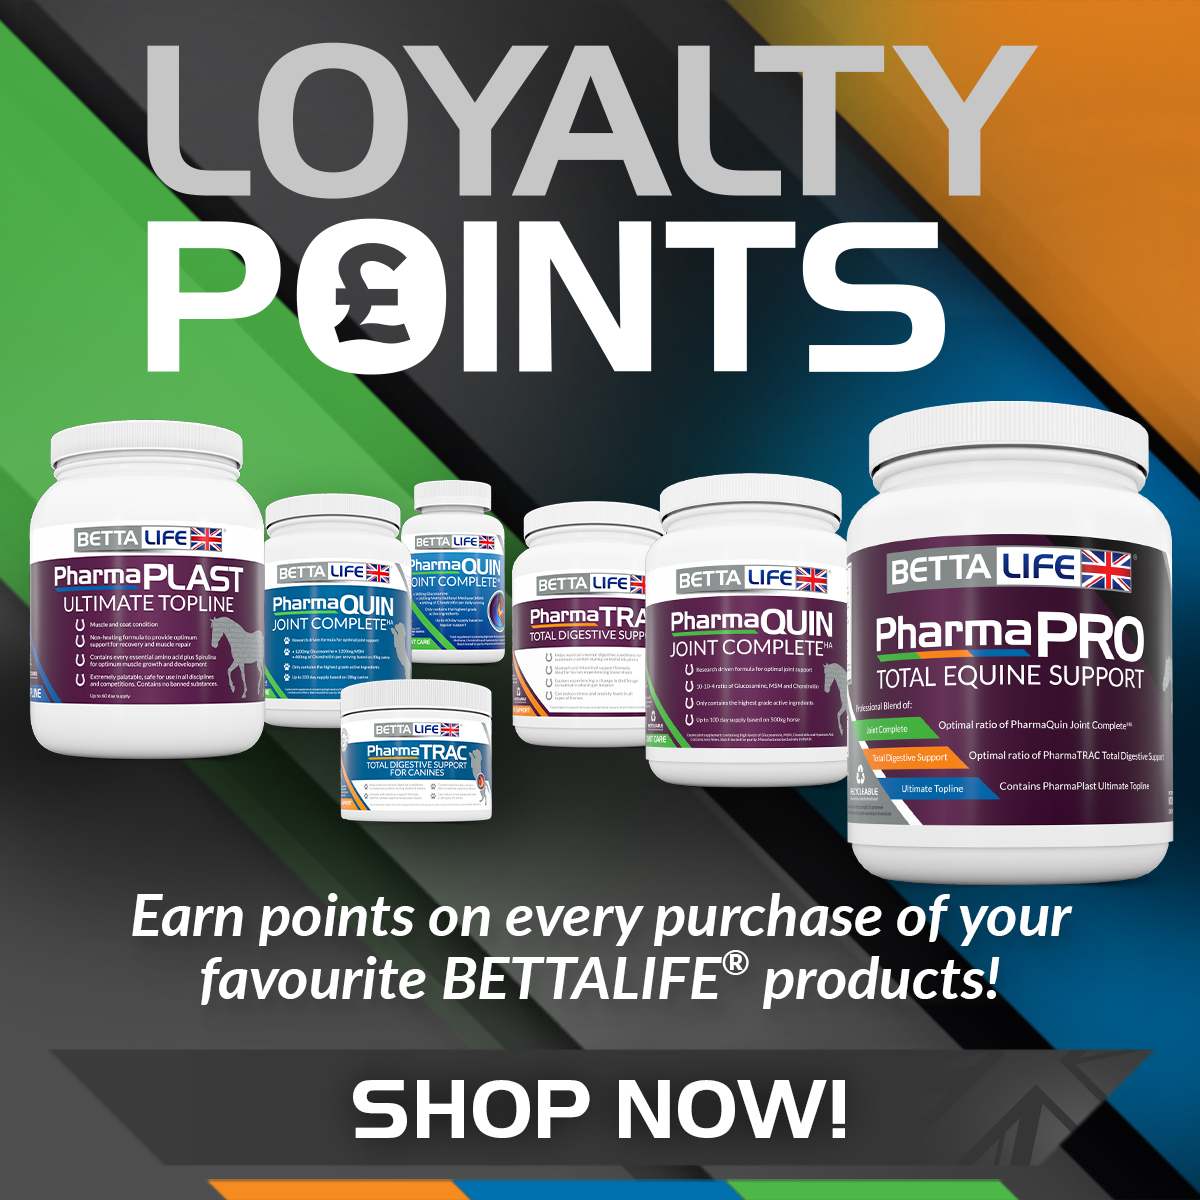 Loyalty Points Square